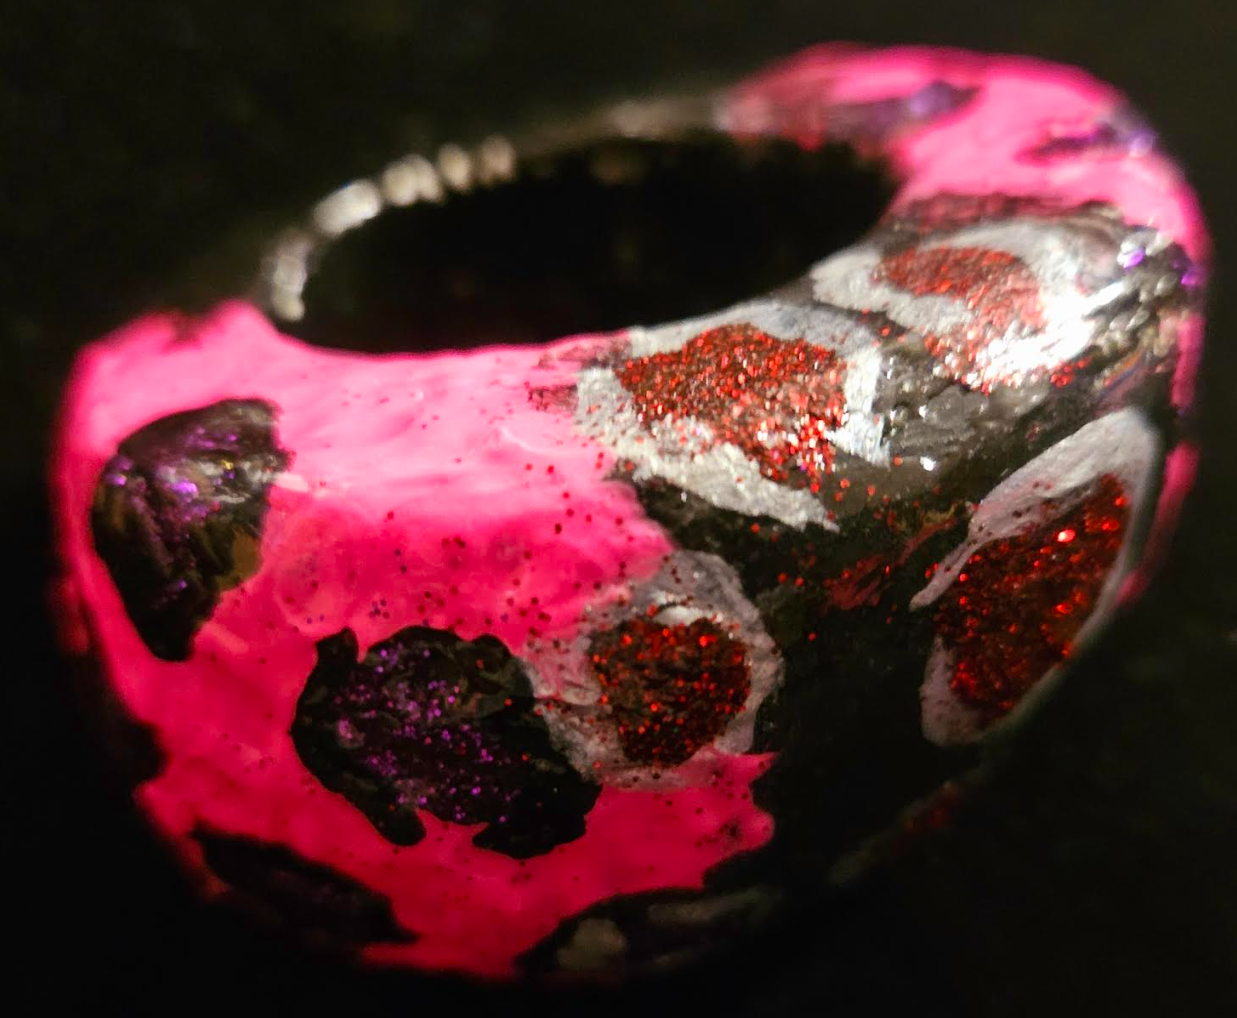 Sculpted Two Finger Dome Statement Ring - Abstract Leopard Print Finger Candy -  Hot Pink Black & Red Gaudy Cocktail Ring - Kat Kouture Jewelry